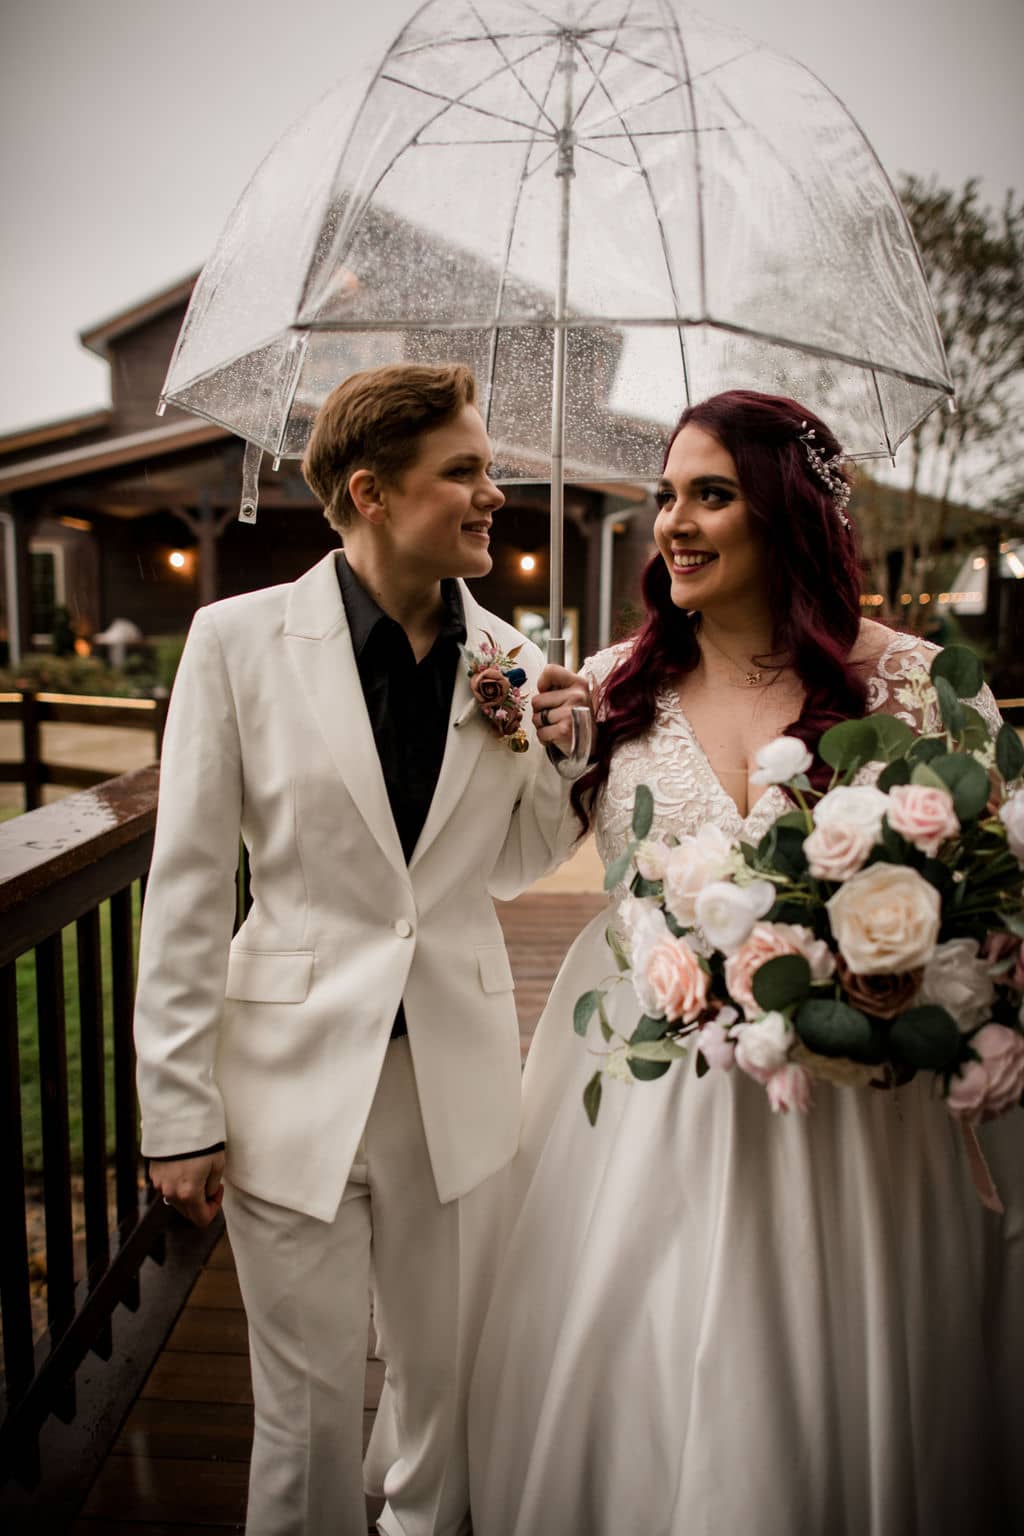 the two texas brides smile at each other under their clear umbrella